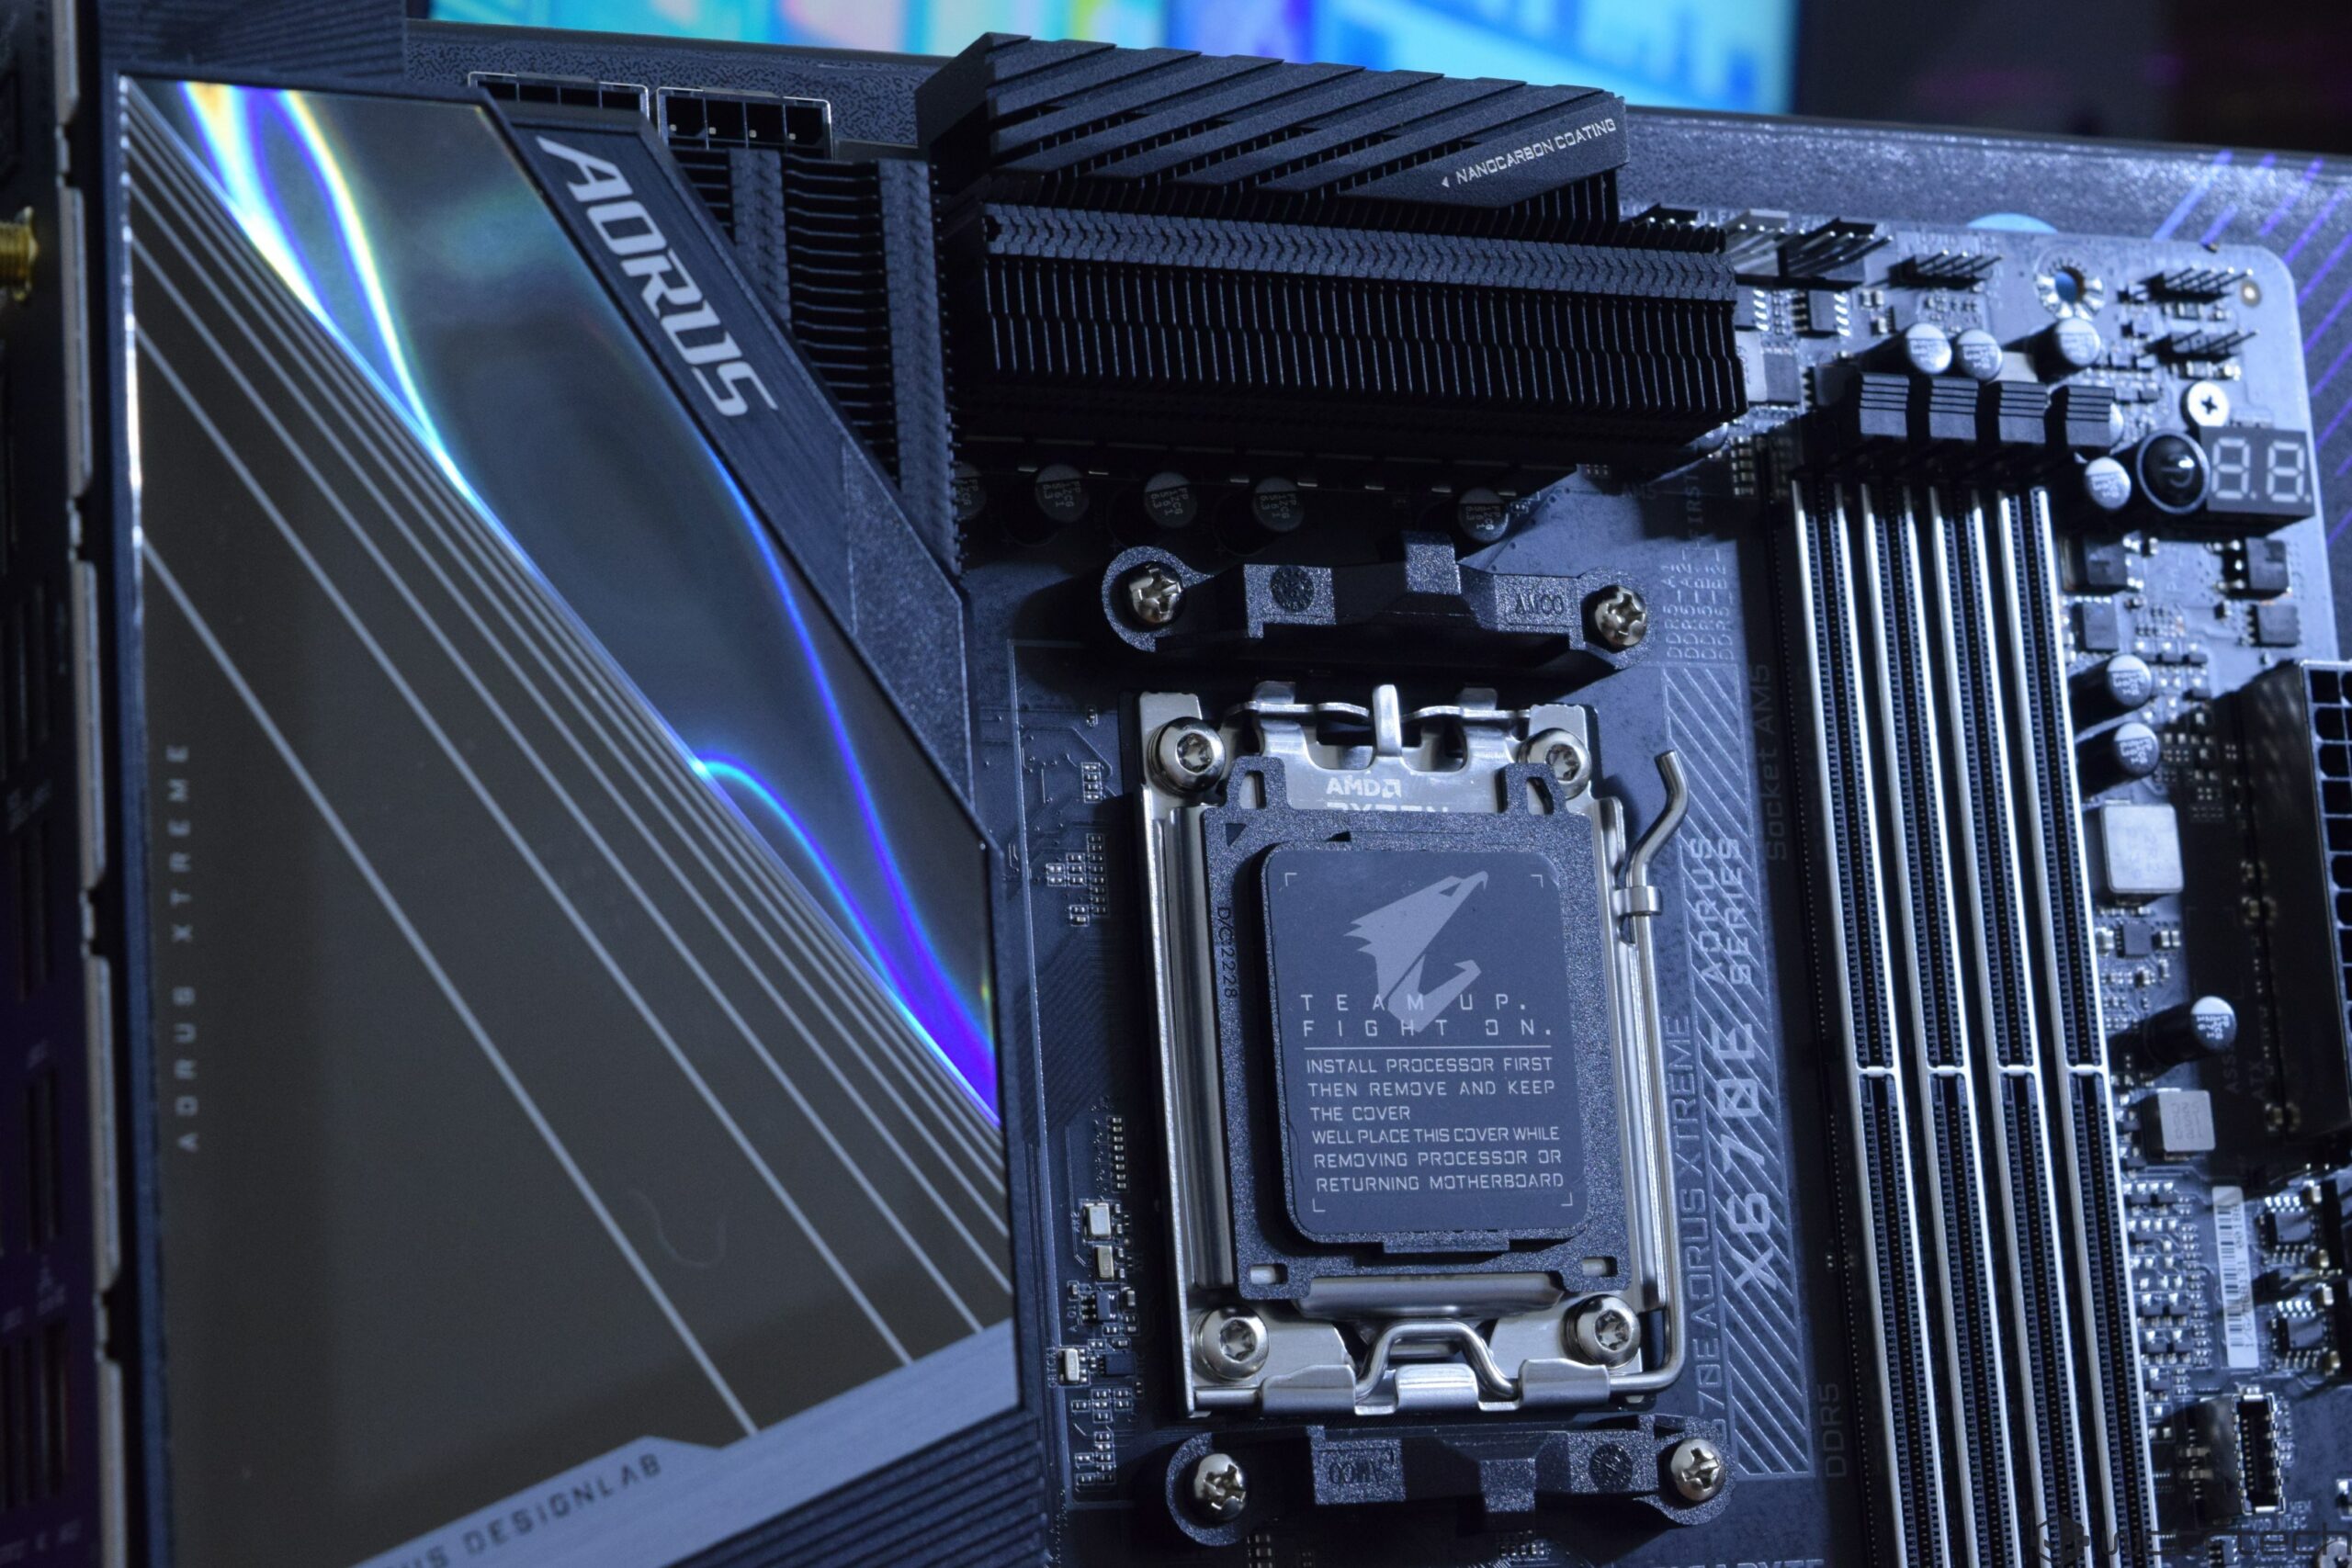 takian.ir gigabyte rolls out bios updates to remove backdoor from motherboards